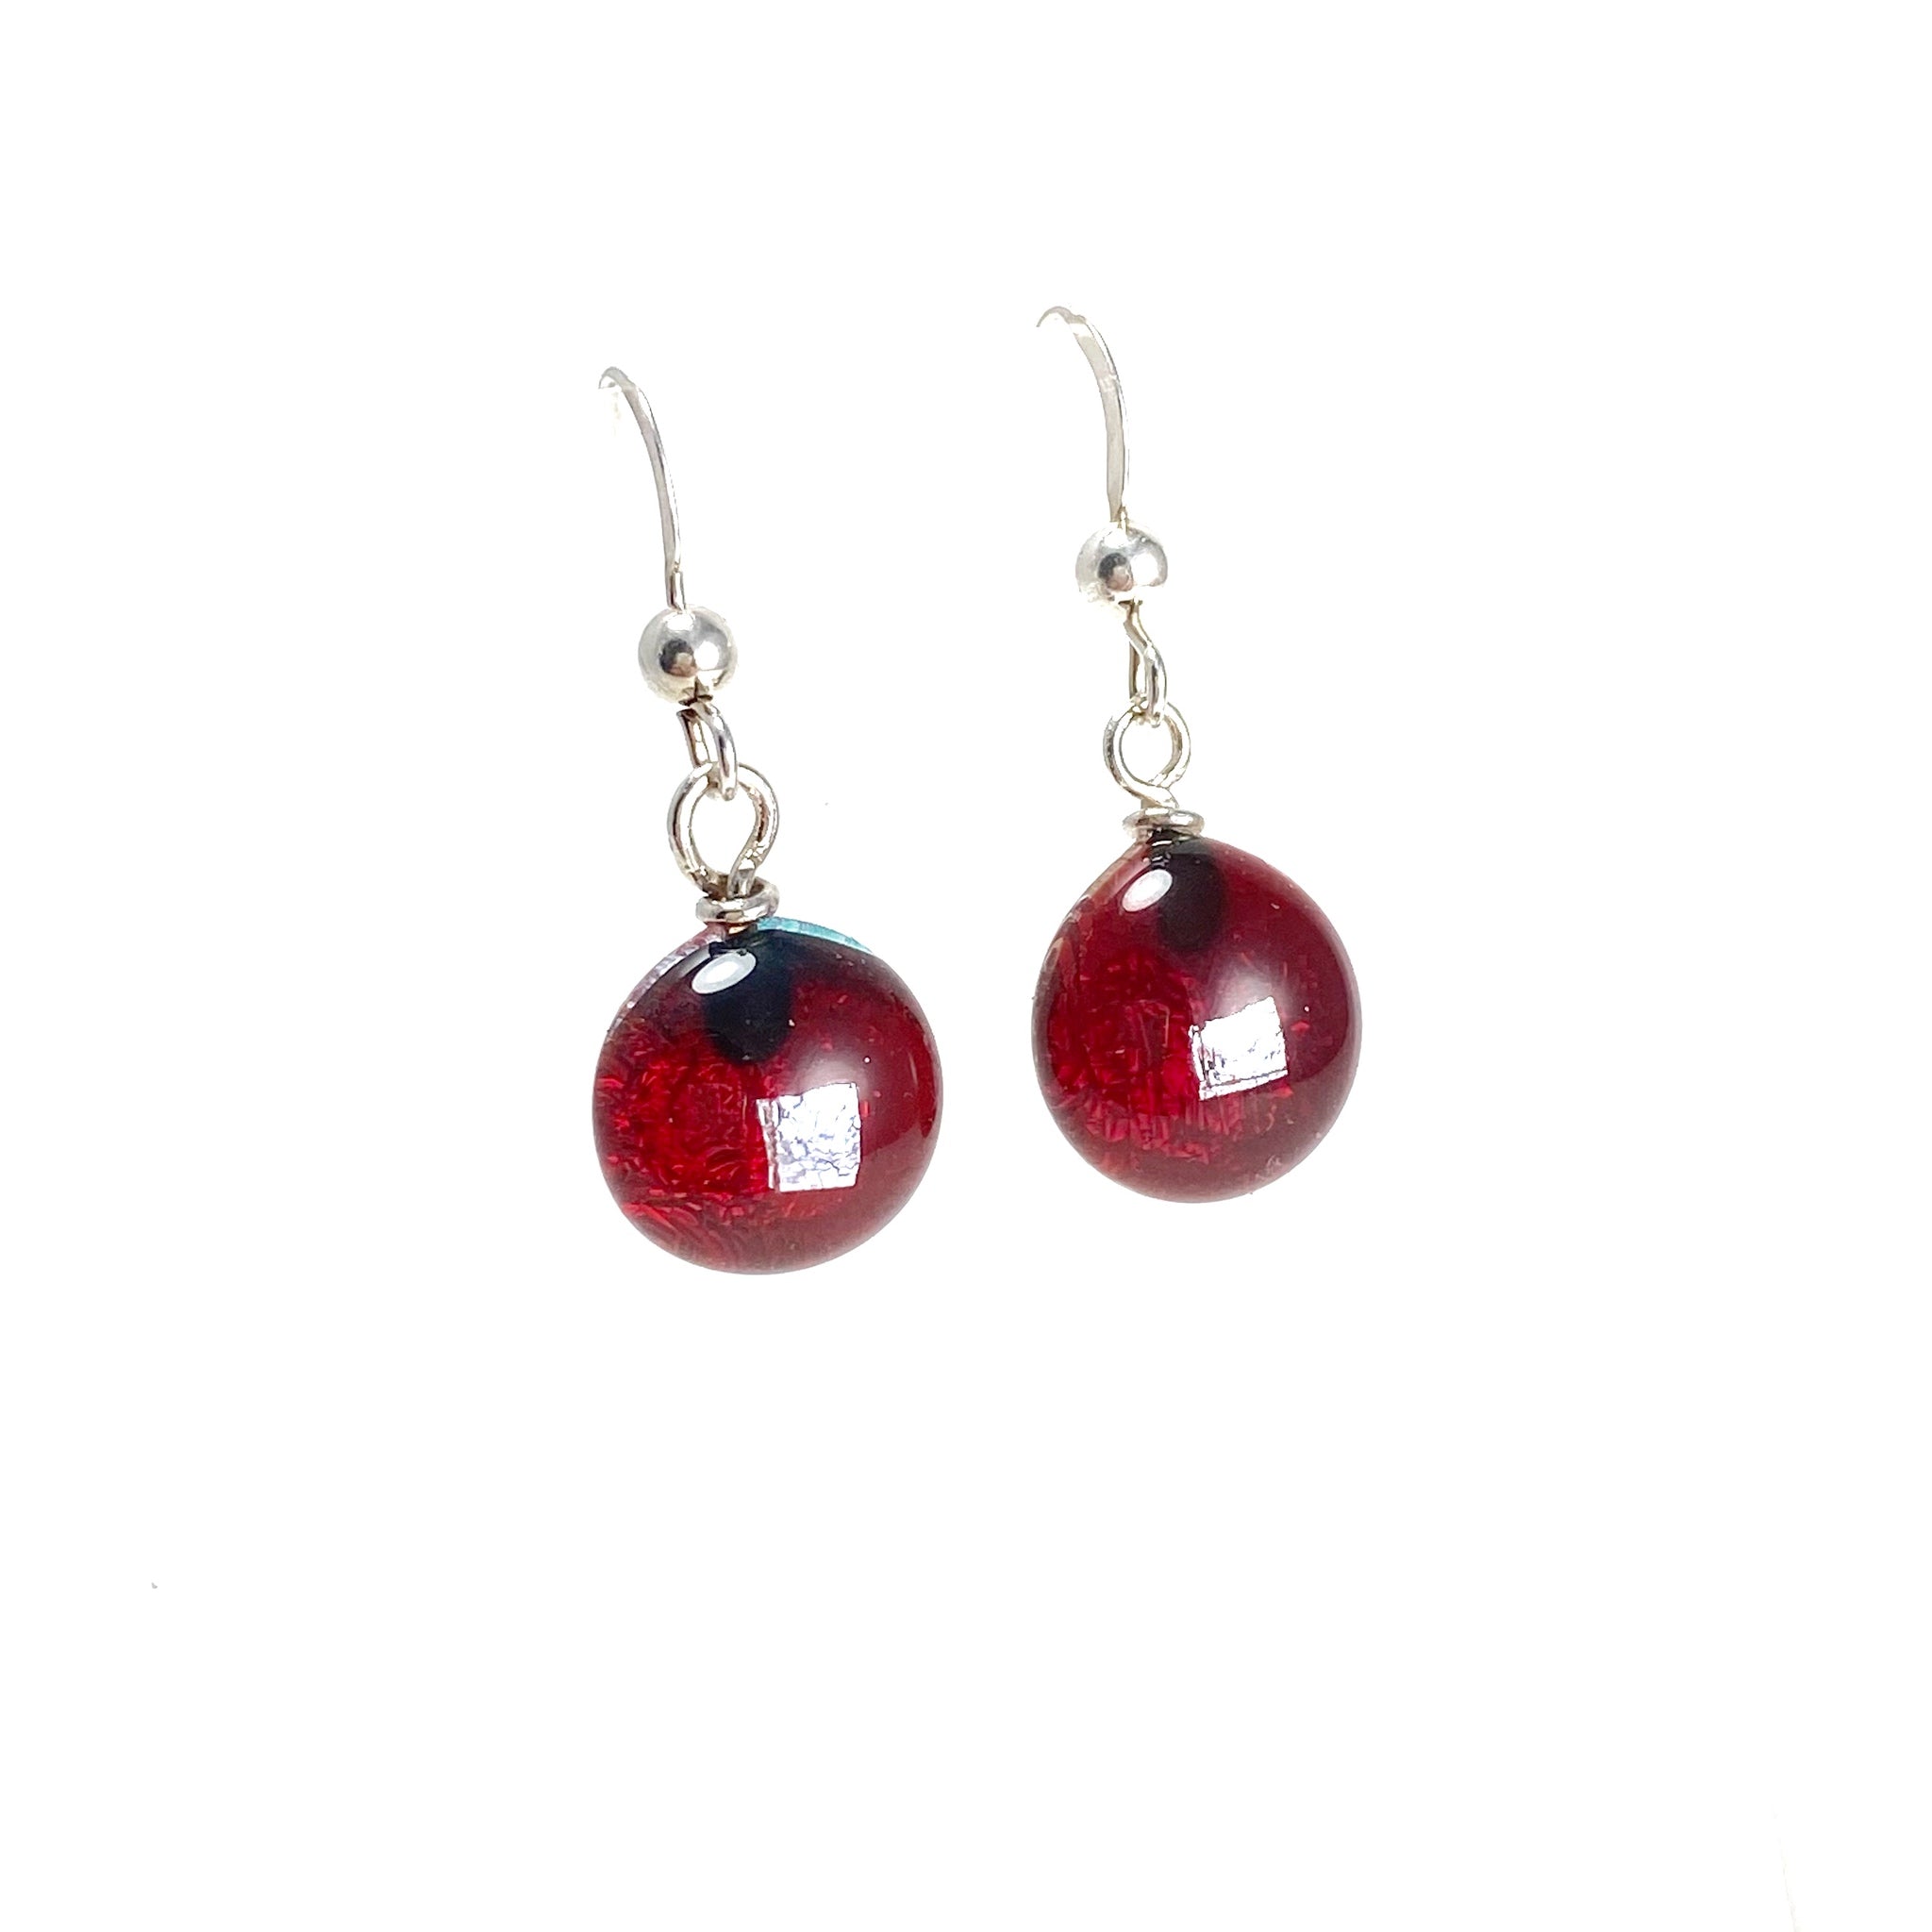 red, space balls, sparkle, glass drops, earrings, fused glass, glass jewelry, glass and silver jewelry, handmade, handcrafted, American Craft, hand fabricated jewelry, hand fabricated jewellery, Athen, Georgia, colorful jewelry, sparkle, bullseye glass, dichroic glass, art jewelry